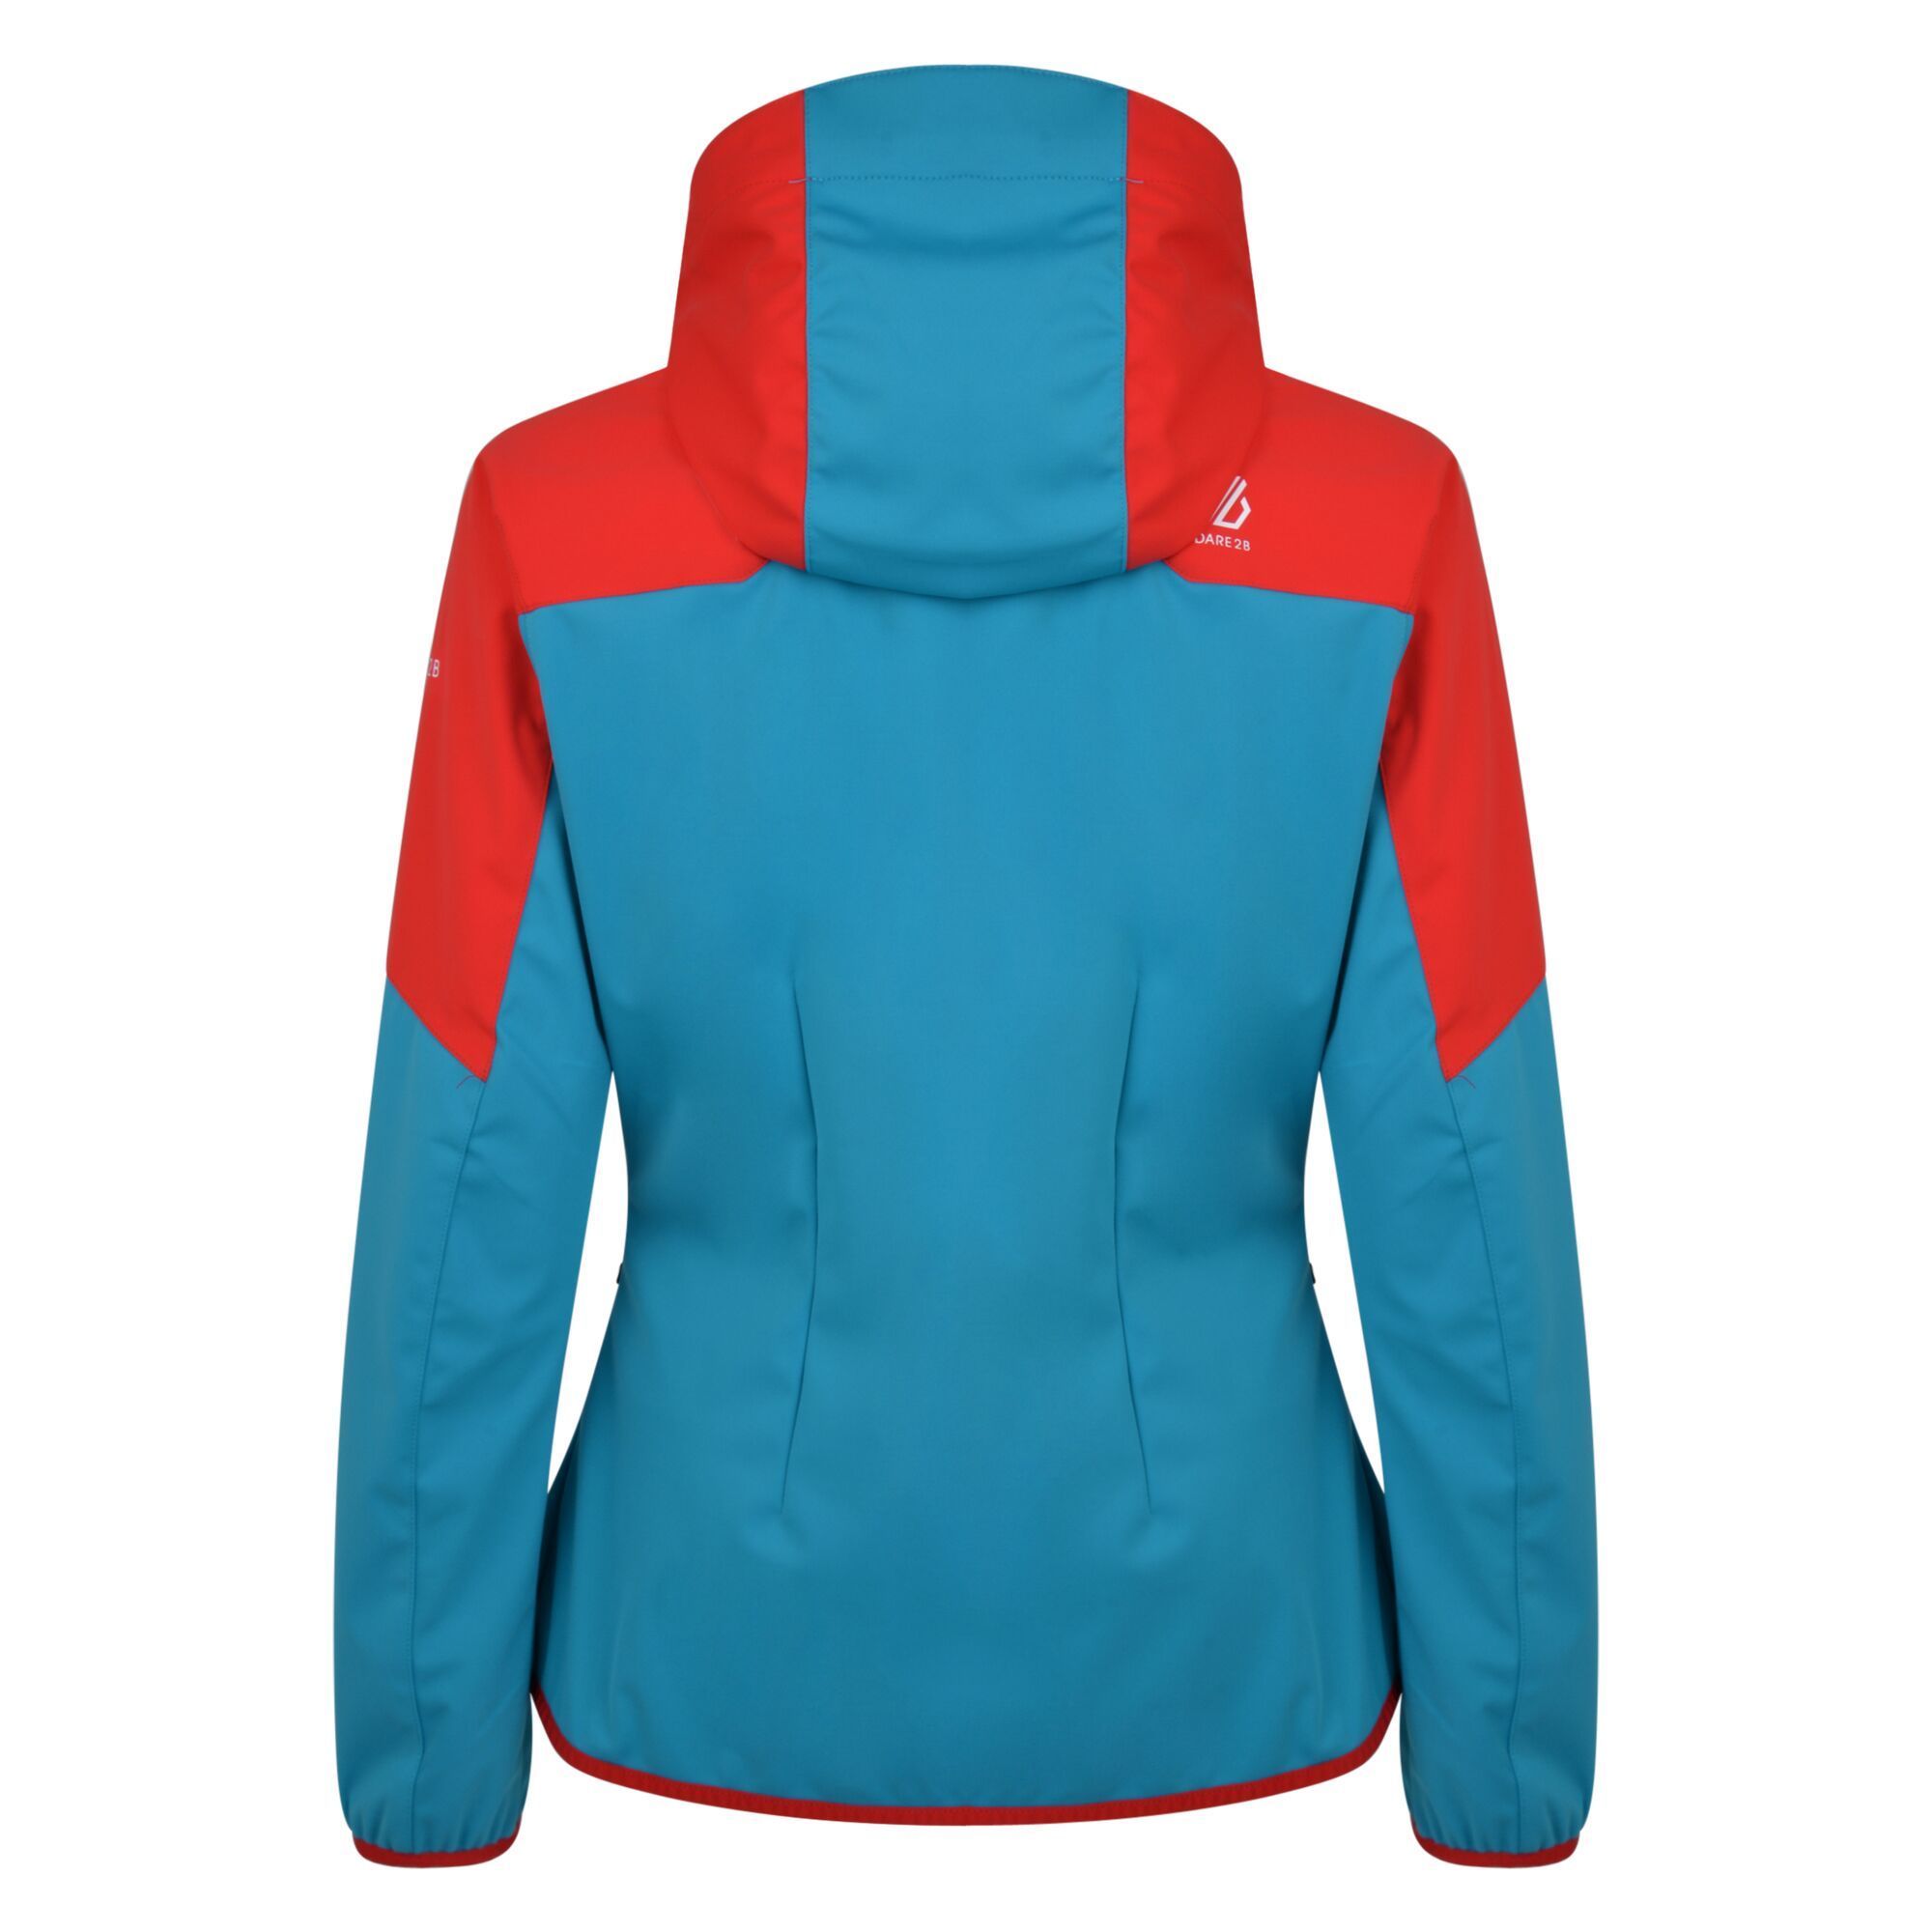 100% polyester Softshell fabric. AEP Kinematics. Seamsmart technology. Waterproof up to 5,000mm/ Breathability rating 5,000/m2/24hrs. Detachable performance fit technical hood with adjusters. Underarm ventilation zips. Articulated sleeves for enhanced range of movement. Stretch binding to cuffs and hem. 1 x zipped chest pocket and 2 x zipped lower pockets. Headphone port to inner pocket bag.